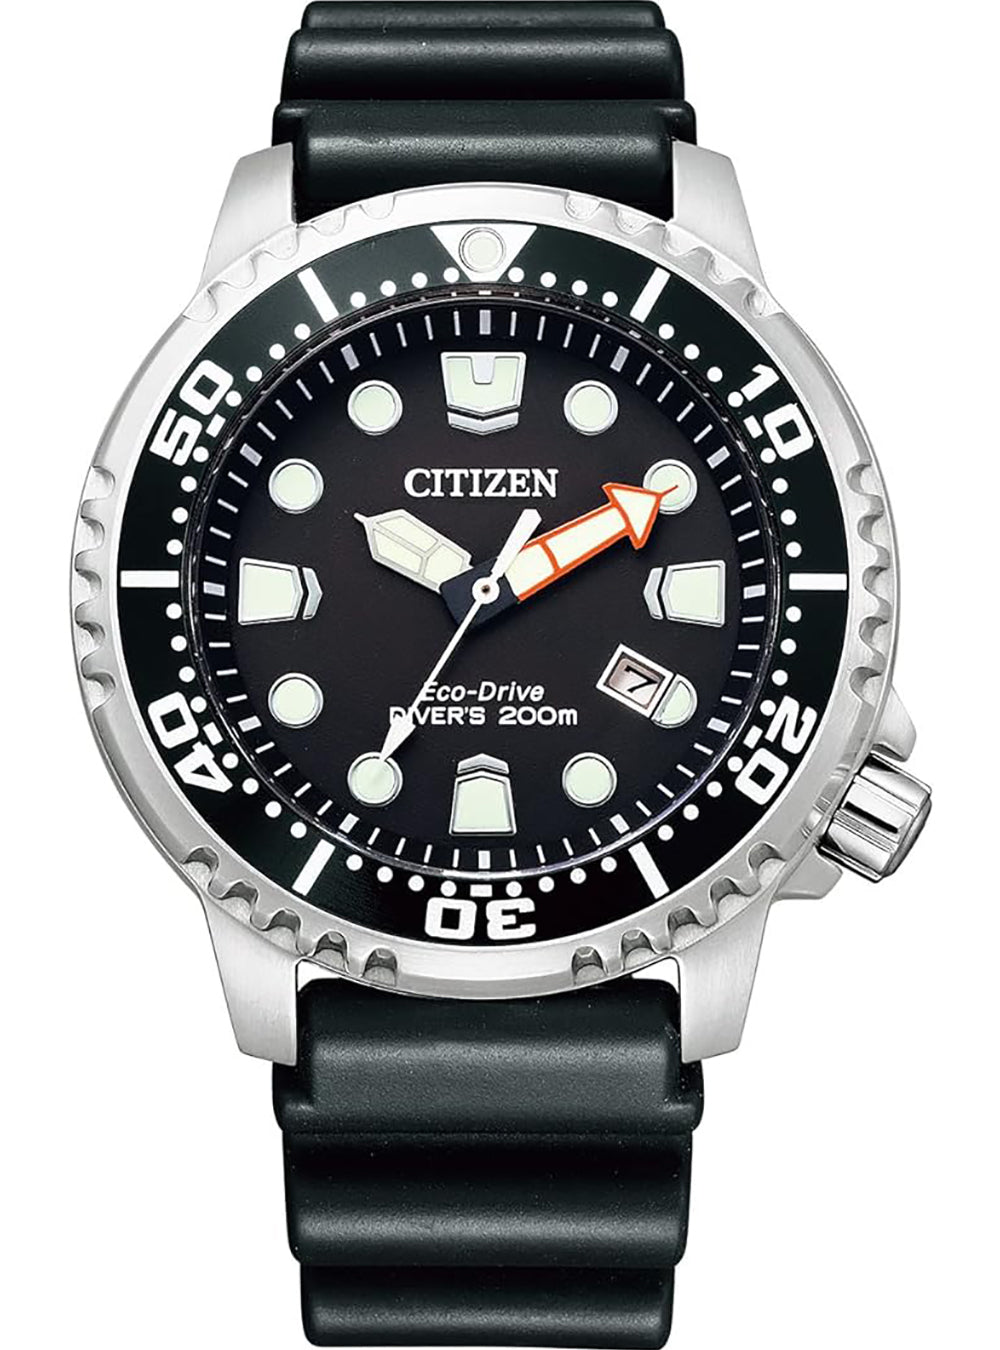 CITIZEN PROMASTER 200M DIVER BN0156-05E MADE IN JAPAN JDM